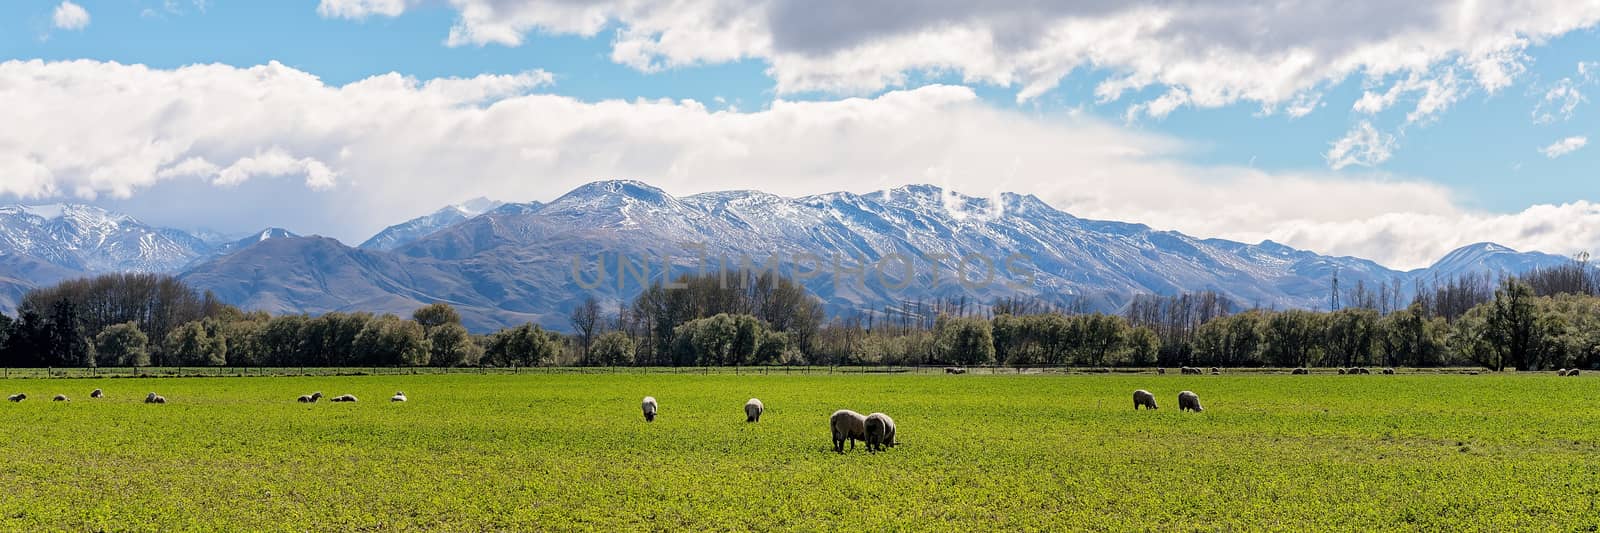 Sheep grazing in a field in front of snow capped mountains in autumn